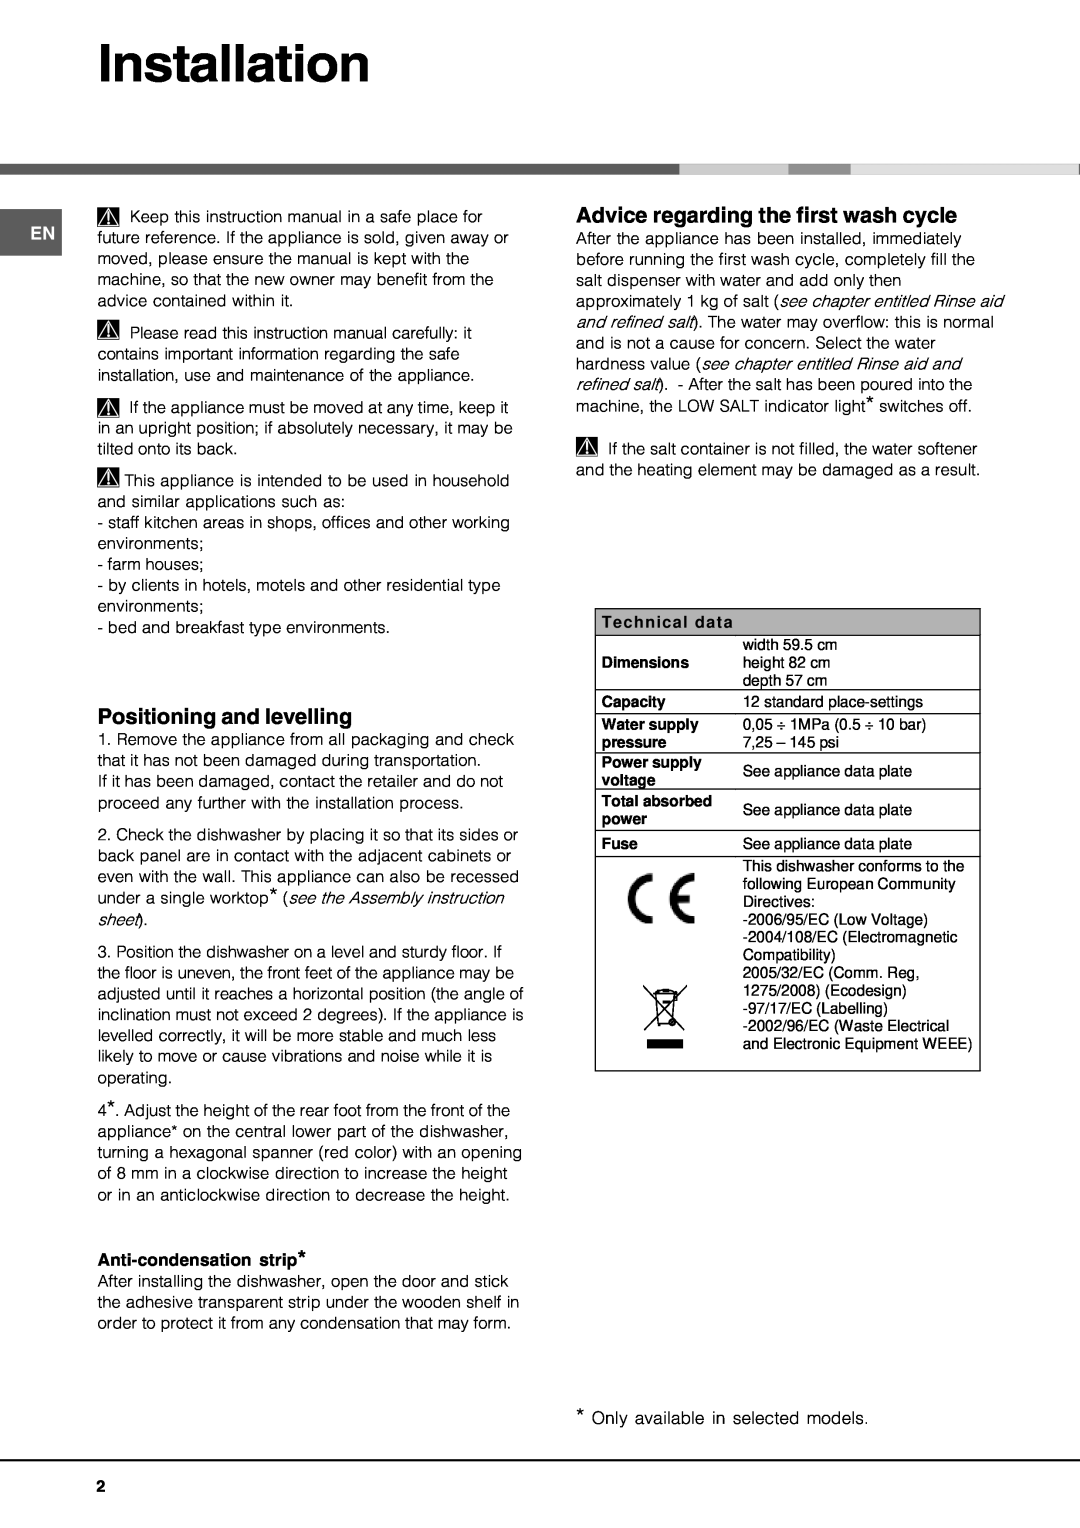 Hotpoint lft 114 manual Installation, Positioning and levelling, Advice regarding the first wash cycle 